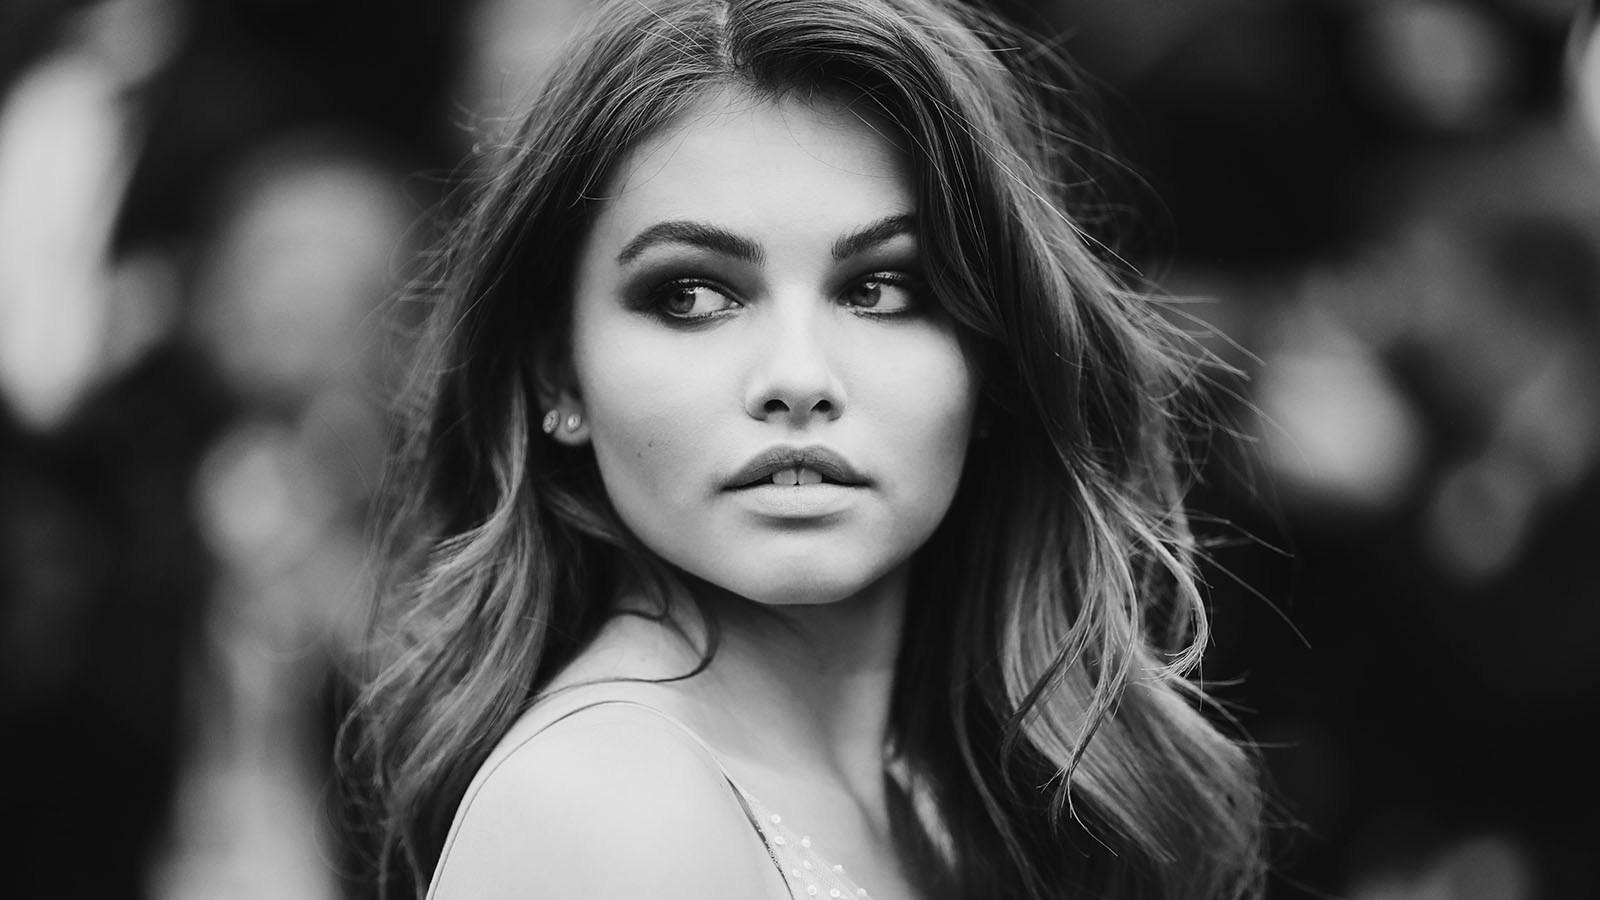 Thylane Blondeau tops 100 Most Beautiful Faces of 2018 list